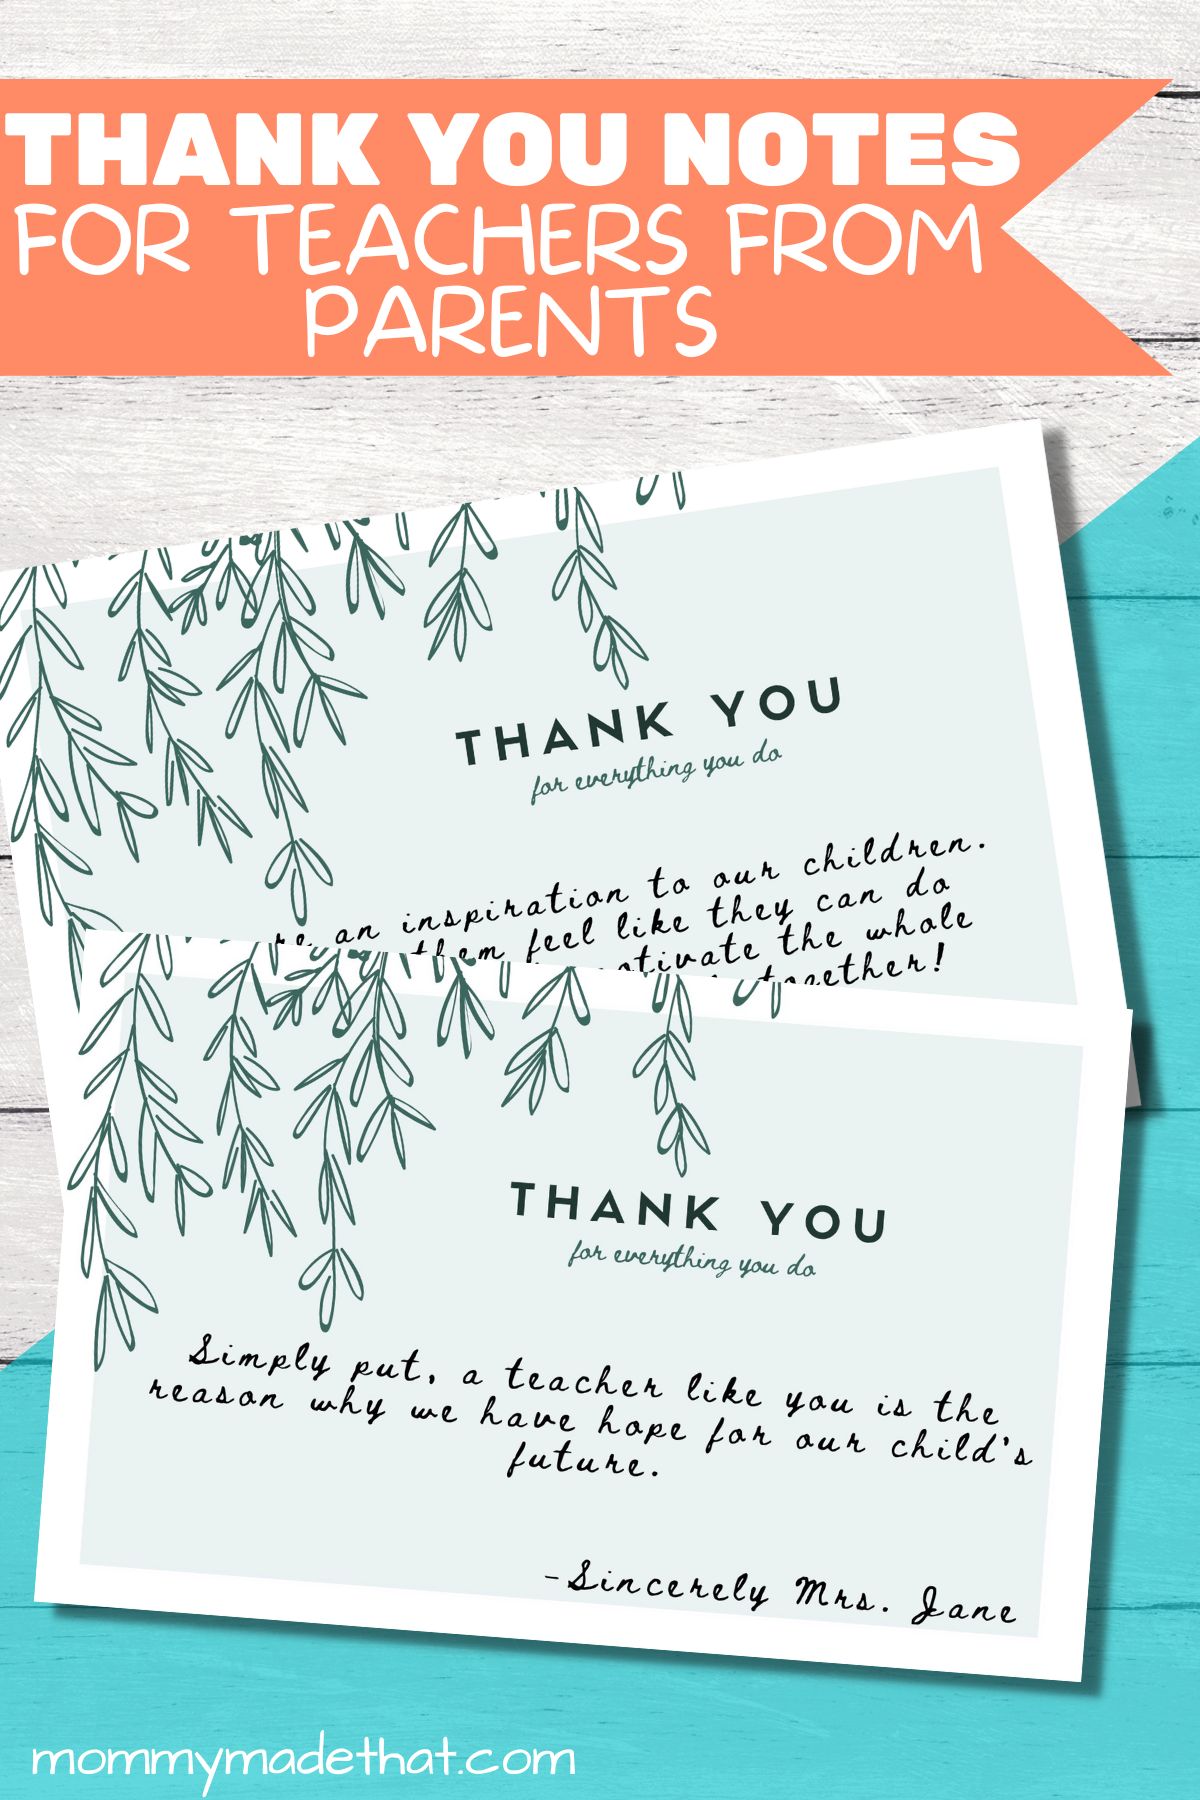 Short and Thoughtful Teacher Thank you Notes From Parents (+Free Printable)